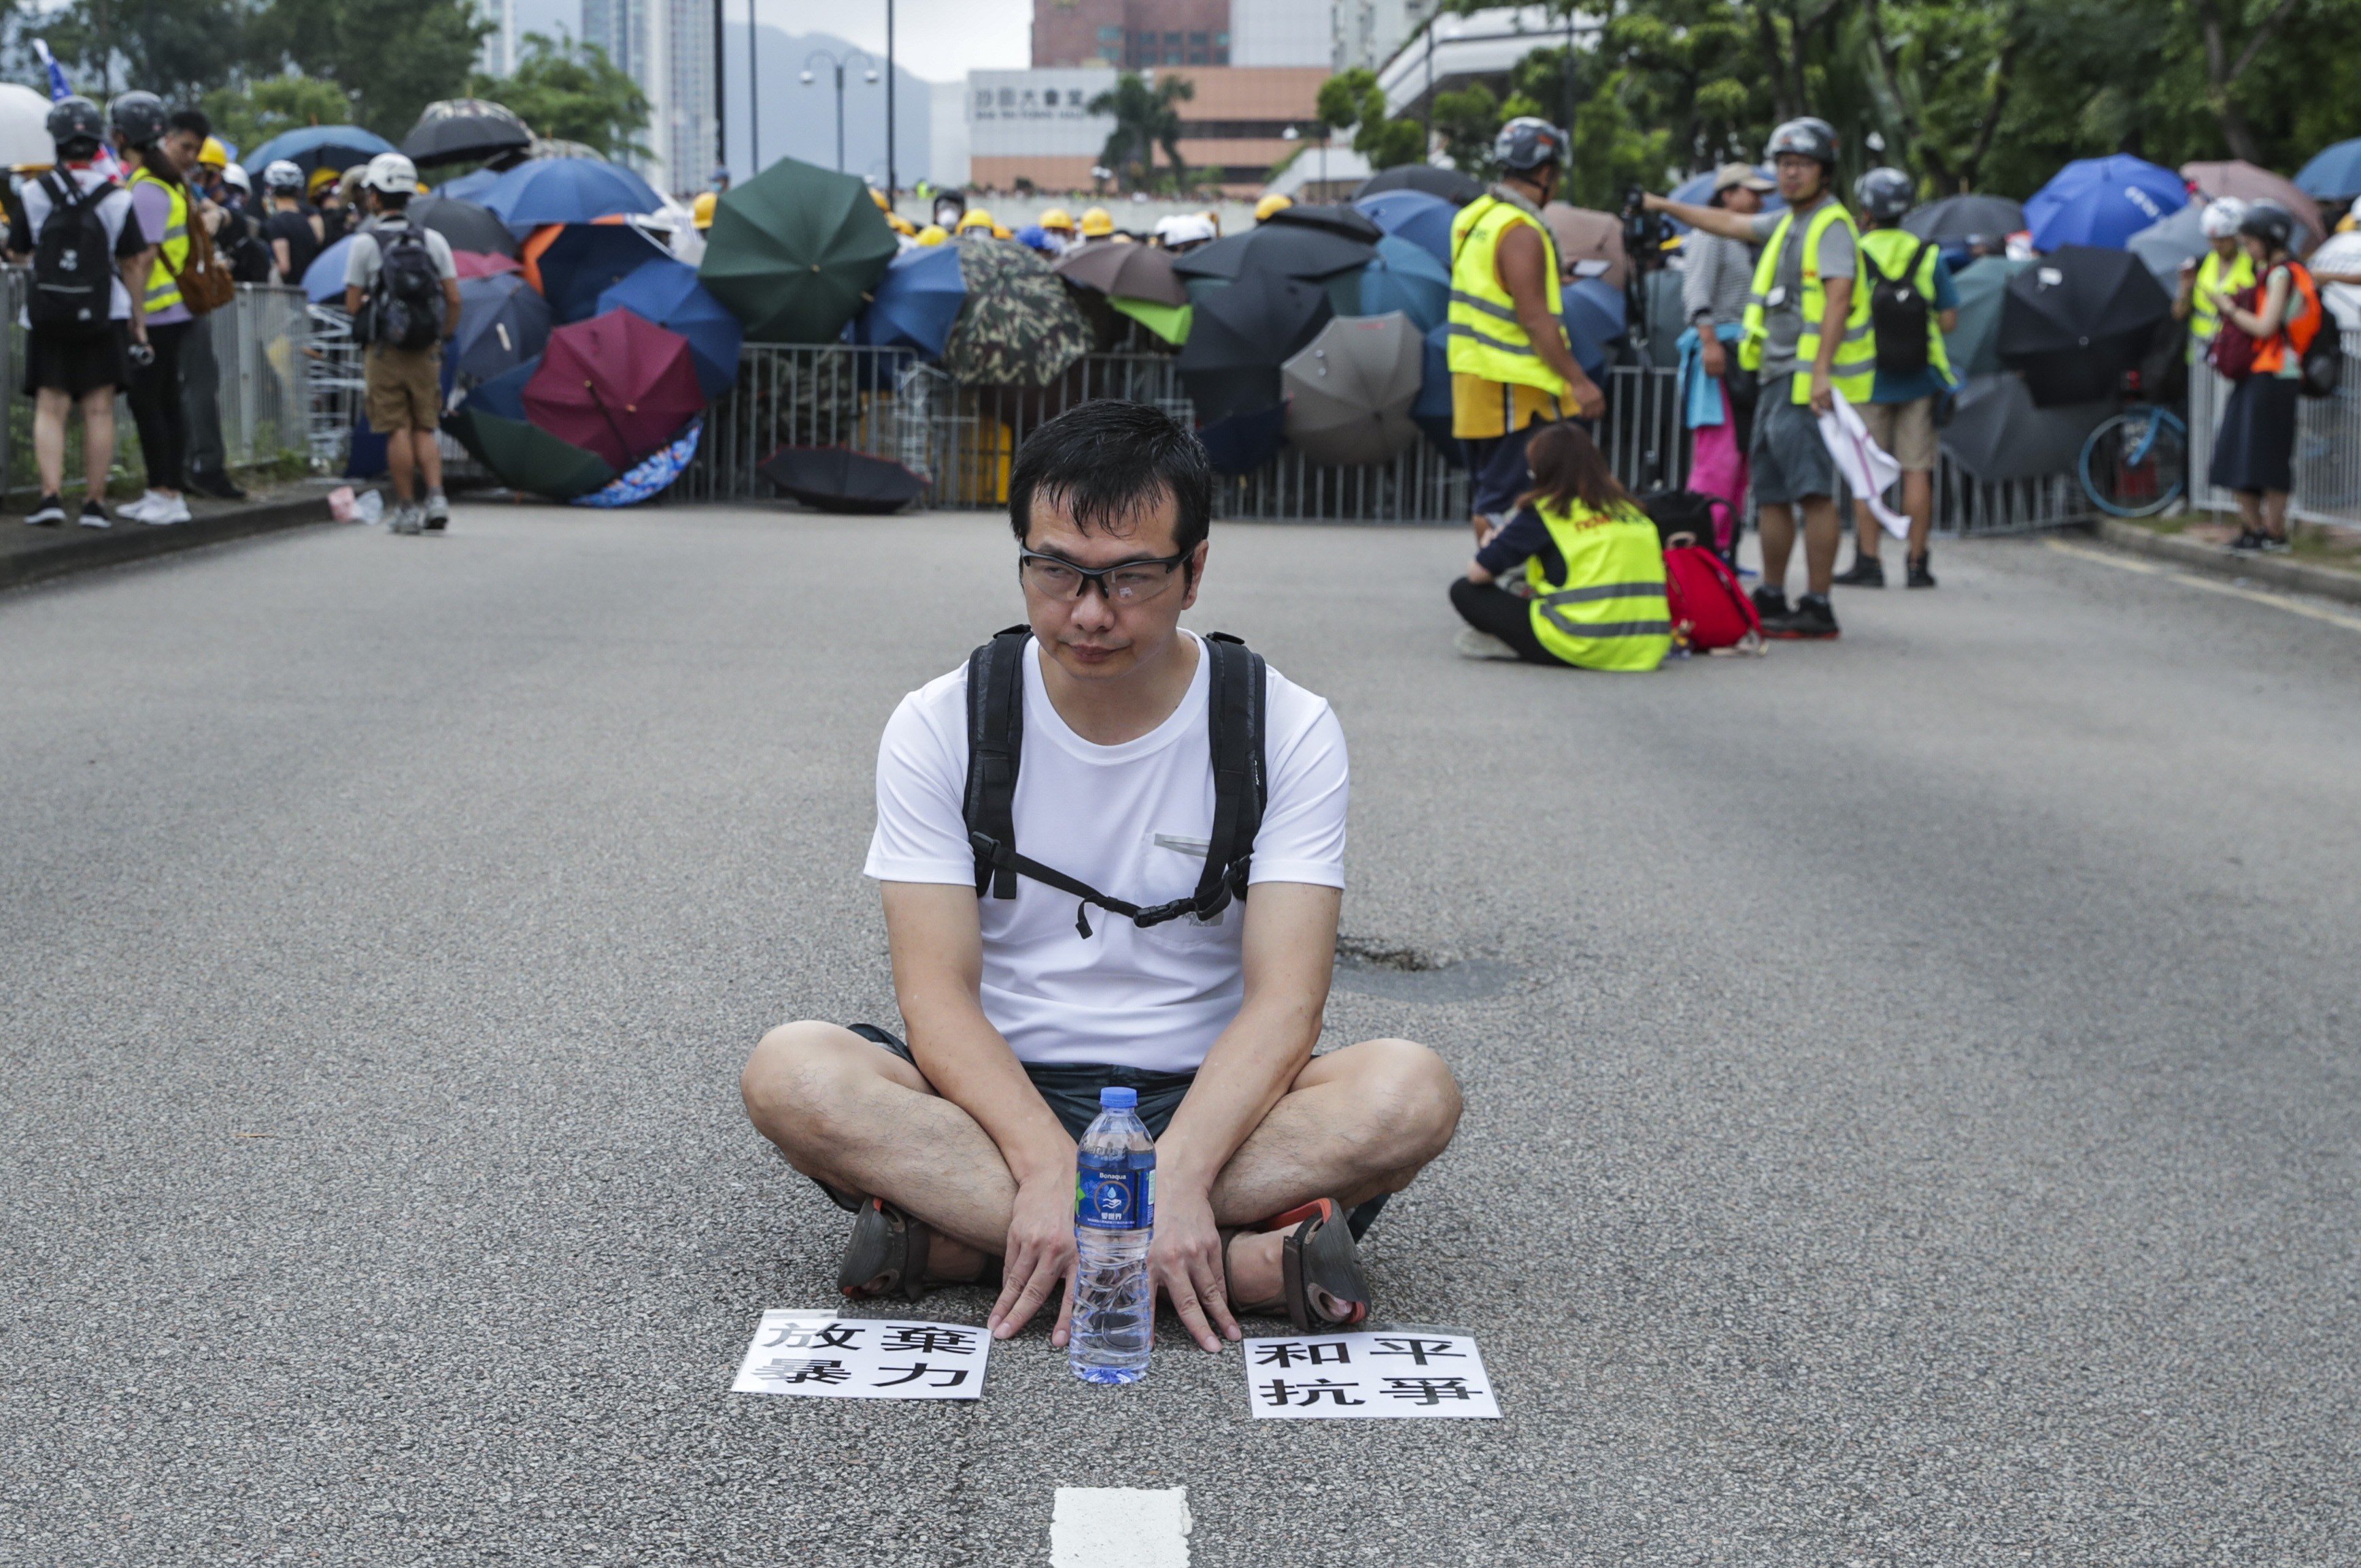 A protester sits down on a Sha Tin street to make a point about non-violence, during a rally against the now-shelved extradition bill, on July 14. The posters on the ground call on demonstrators to give up violence and protest peacefully. Photo: Edmond So